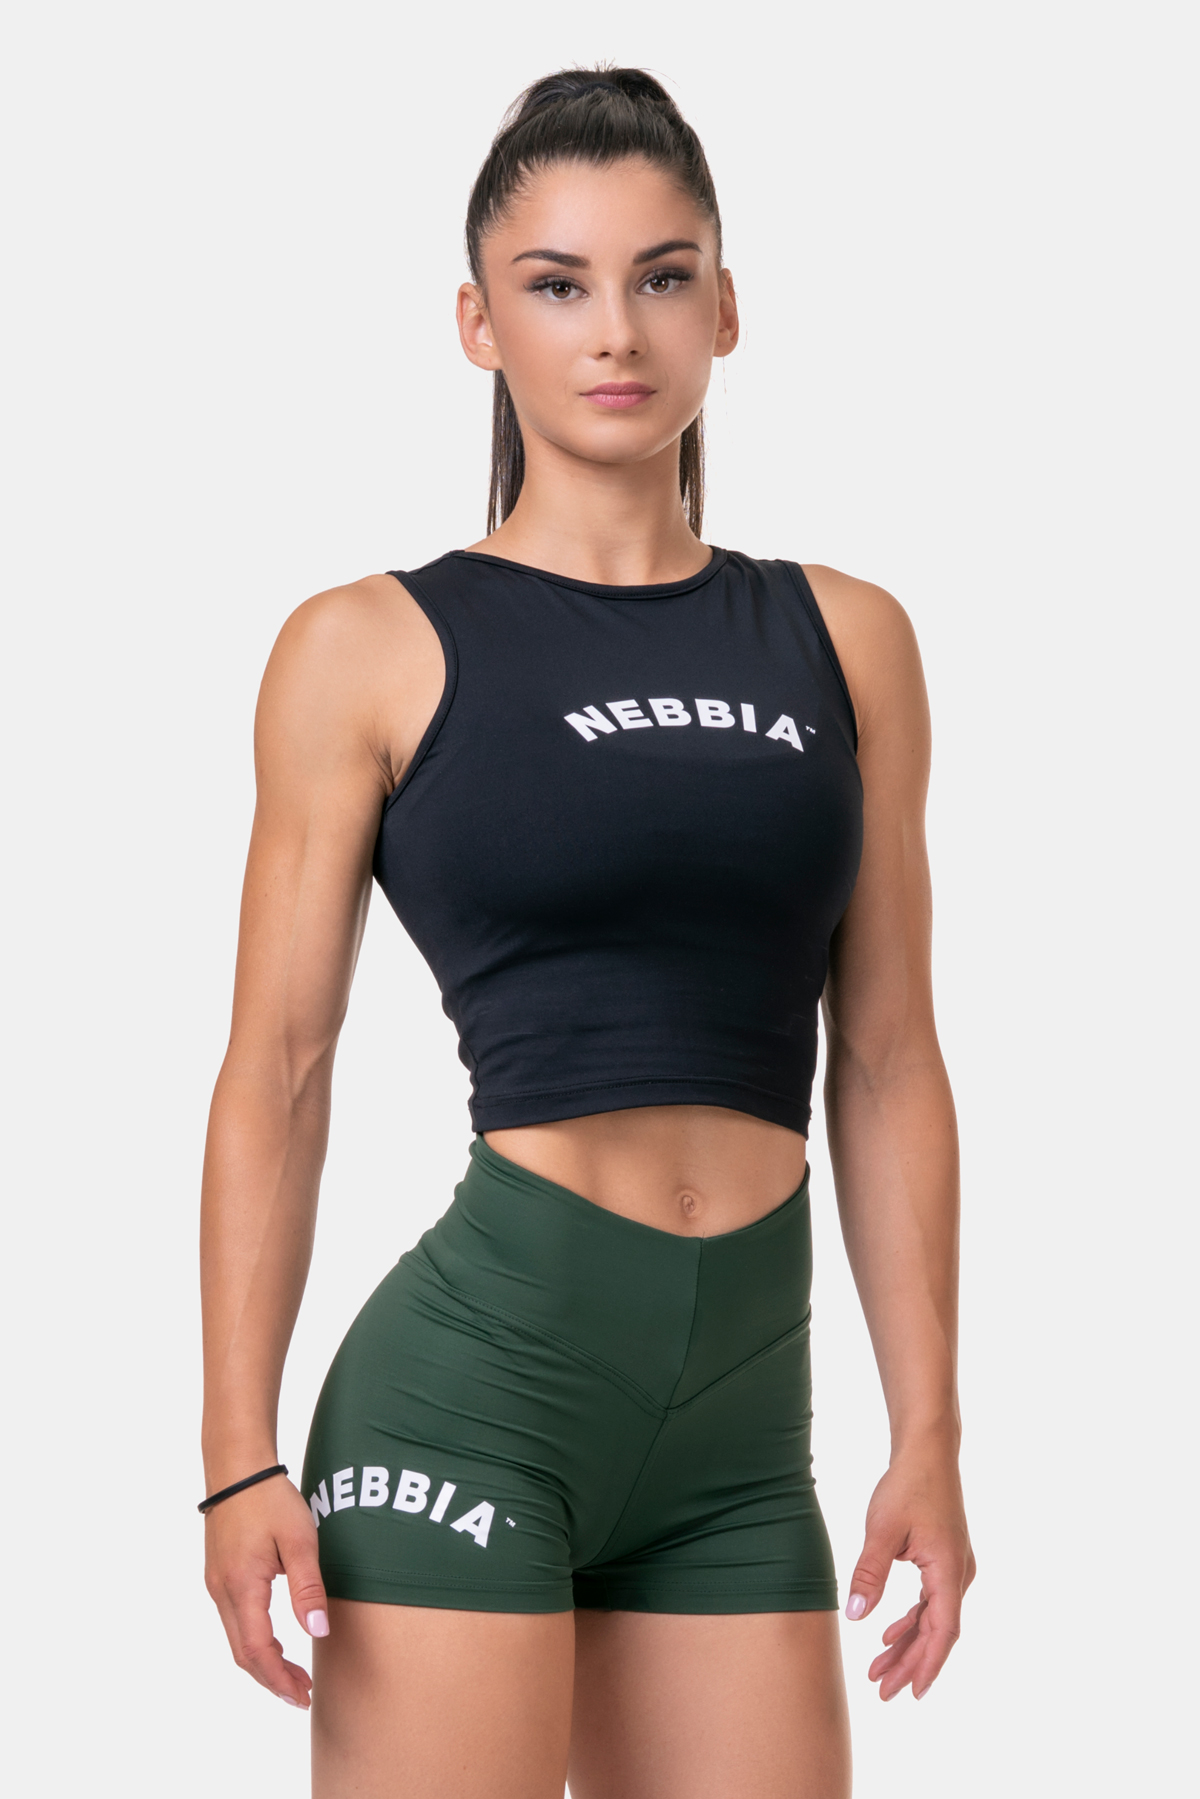 Fit me sport. Женская майка nebbia Fit sporty Tank Top 577 Black. Майка nebbia женская. Nebbia одежда для фитнеса. Футболка nebbia 583 Loose Fit & sporty Crop Top old Rose.